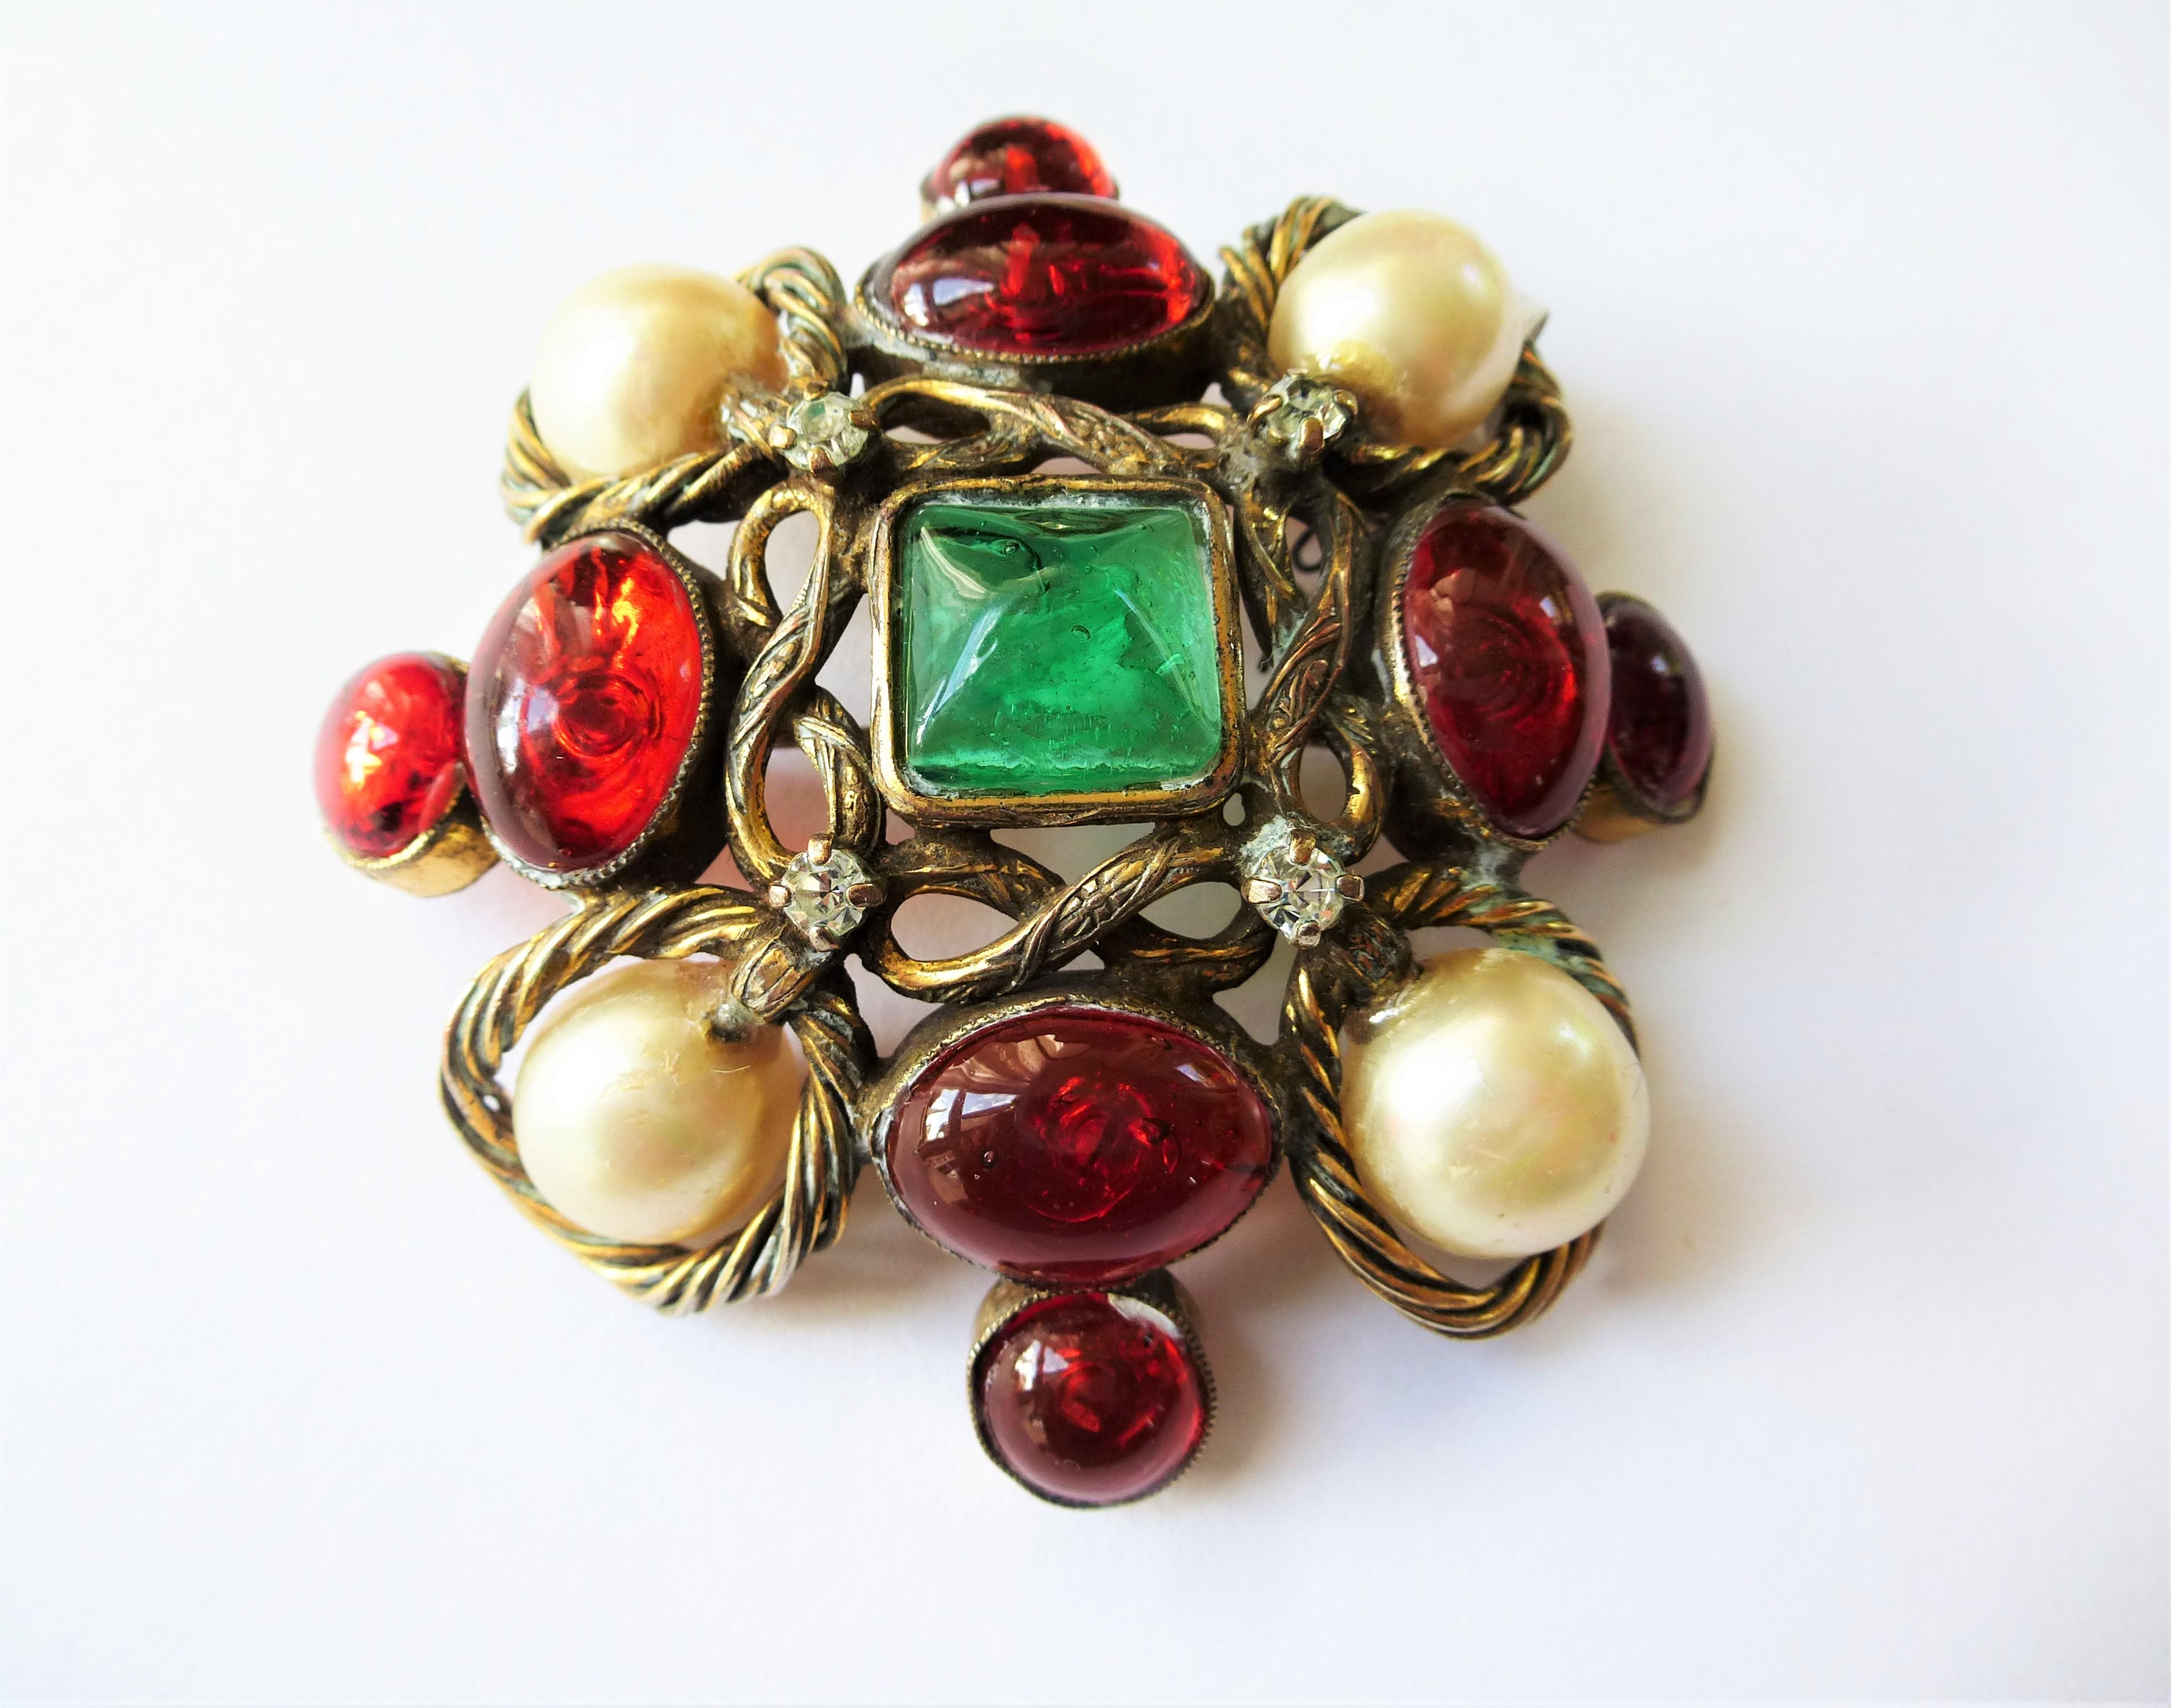 A beautiful early unsigned Chanel brooch from the 1960s made by Robert Goossens Paris. 
The beautiful green and red glass stones from the House of Gripoix. 4 well-preserved fake pearls decorate this beautiful brooch,  also 4 small set rhinestones.